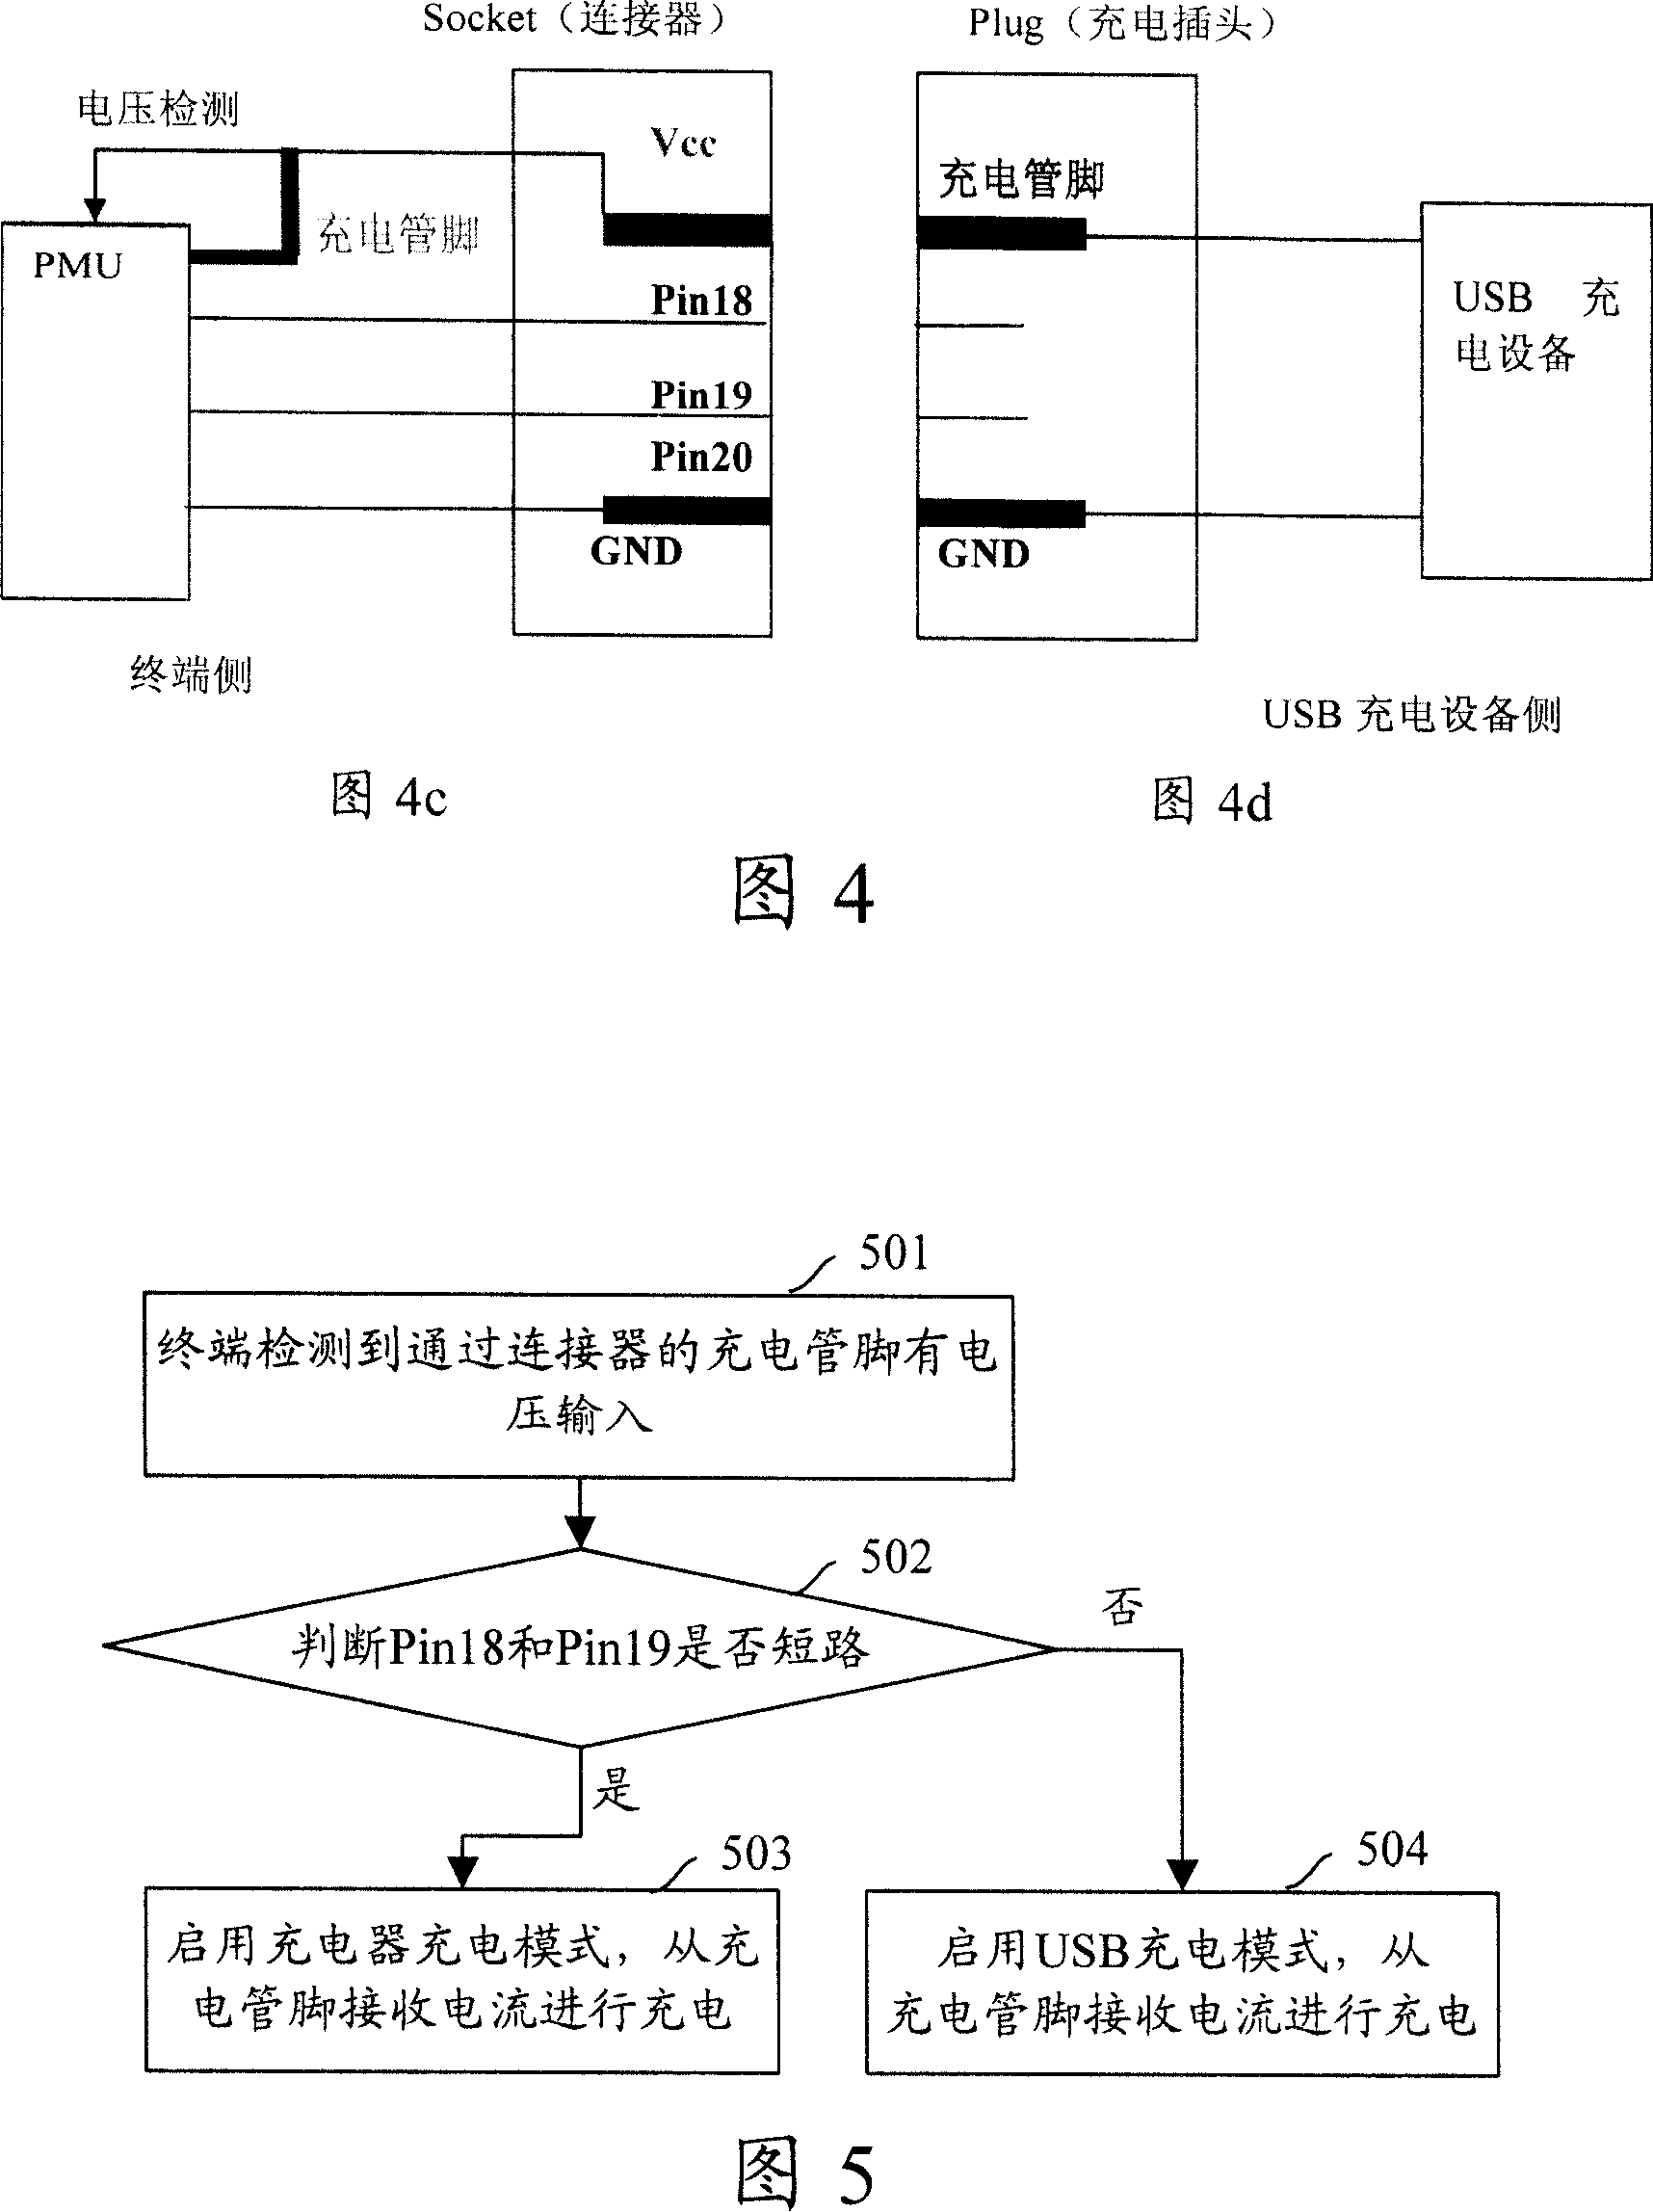 Terminal equipment, connector, charger and charging method